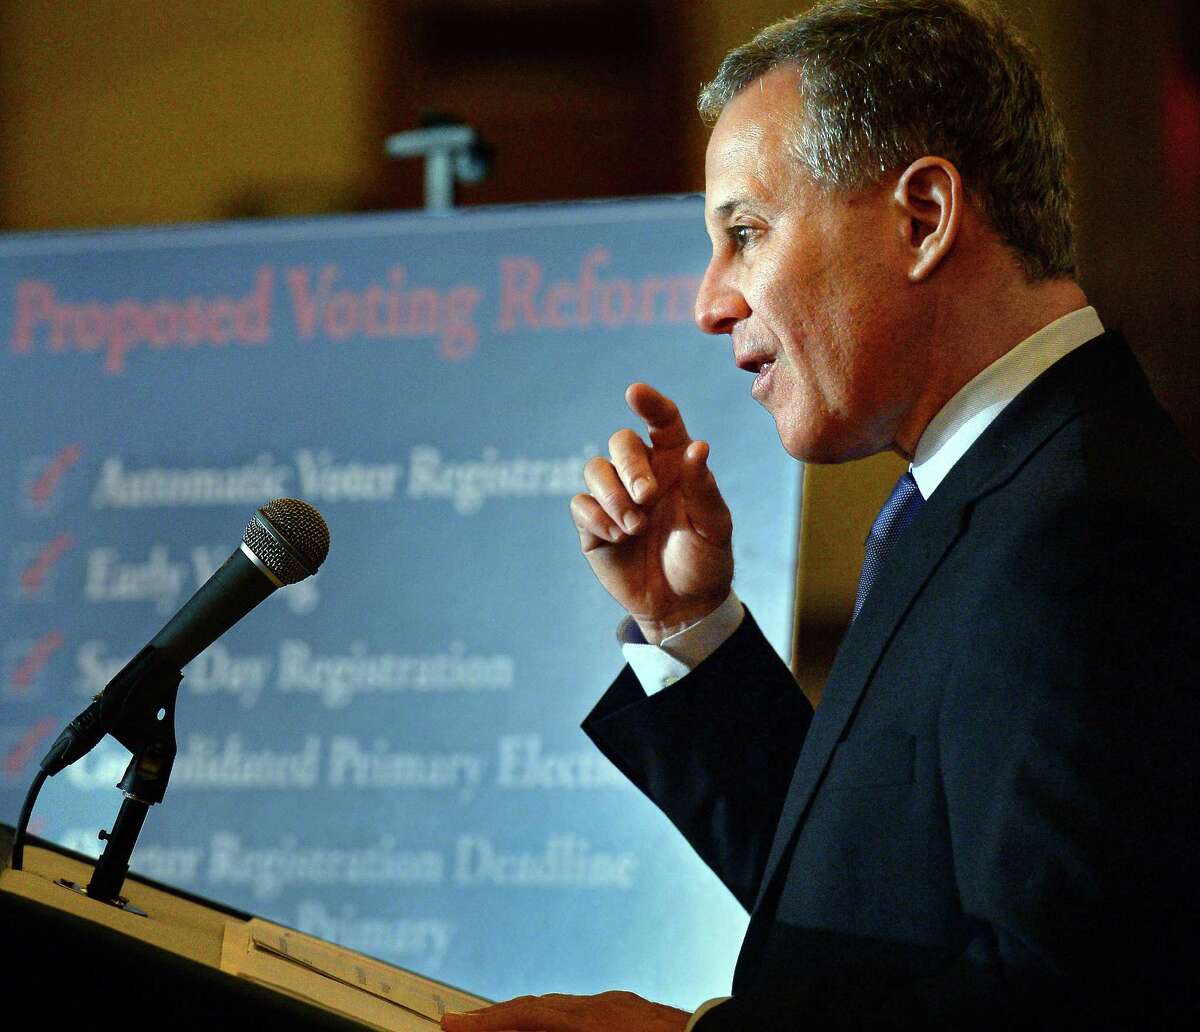 Attorney General Eric Schneiderman releases a report on voting rights across the state, detailing the results of his inquiry into the unprecedented level of voting complaints regarding the April 2016 presidential primary during a news conference at the Capitol Tuesday Dec. 6, 2016 in Albany, NY. (John Carl D'Annibale / Times Union)